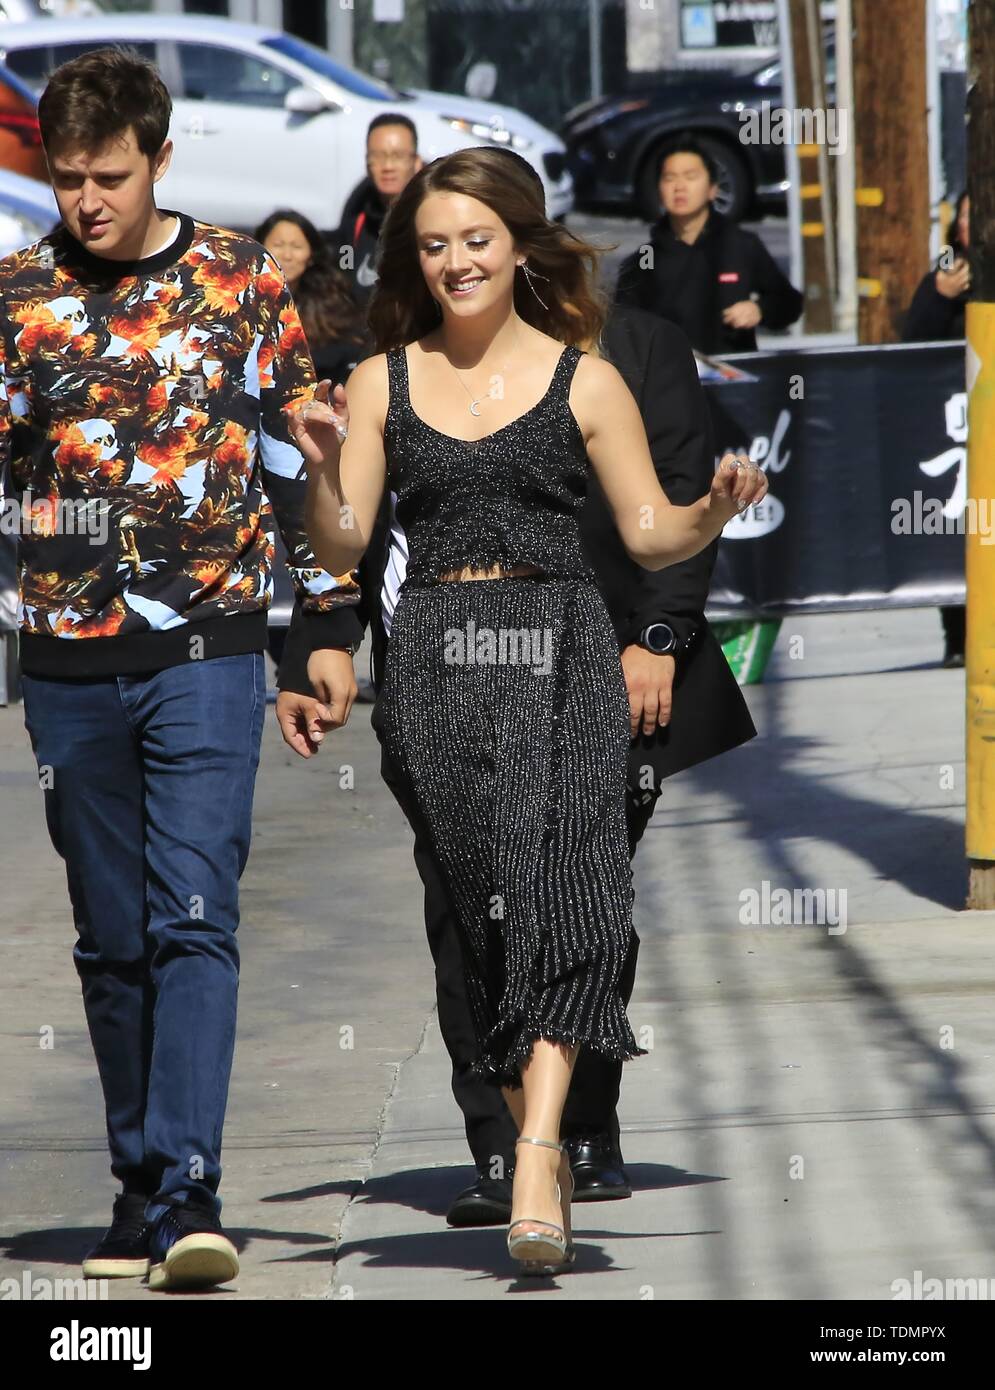 Billie Lourd and Trevor Noah arrive for appearances on Jimmy Kimmel Live! May 16, 2019 Hollywood, CA.  Featuring: Billie Lourd Where: Hollywood, California, United States When: 17 May 2019 Credit: WENN.com Stock Photo